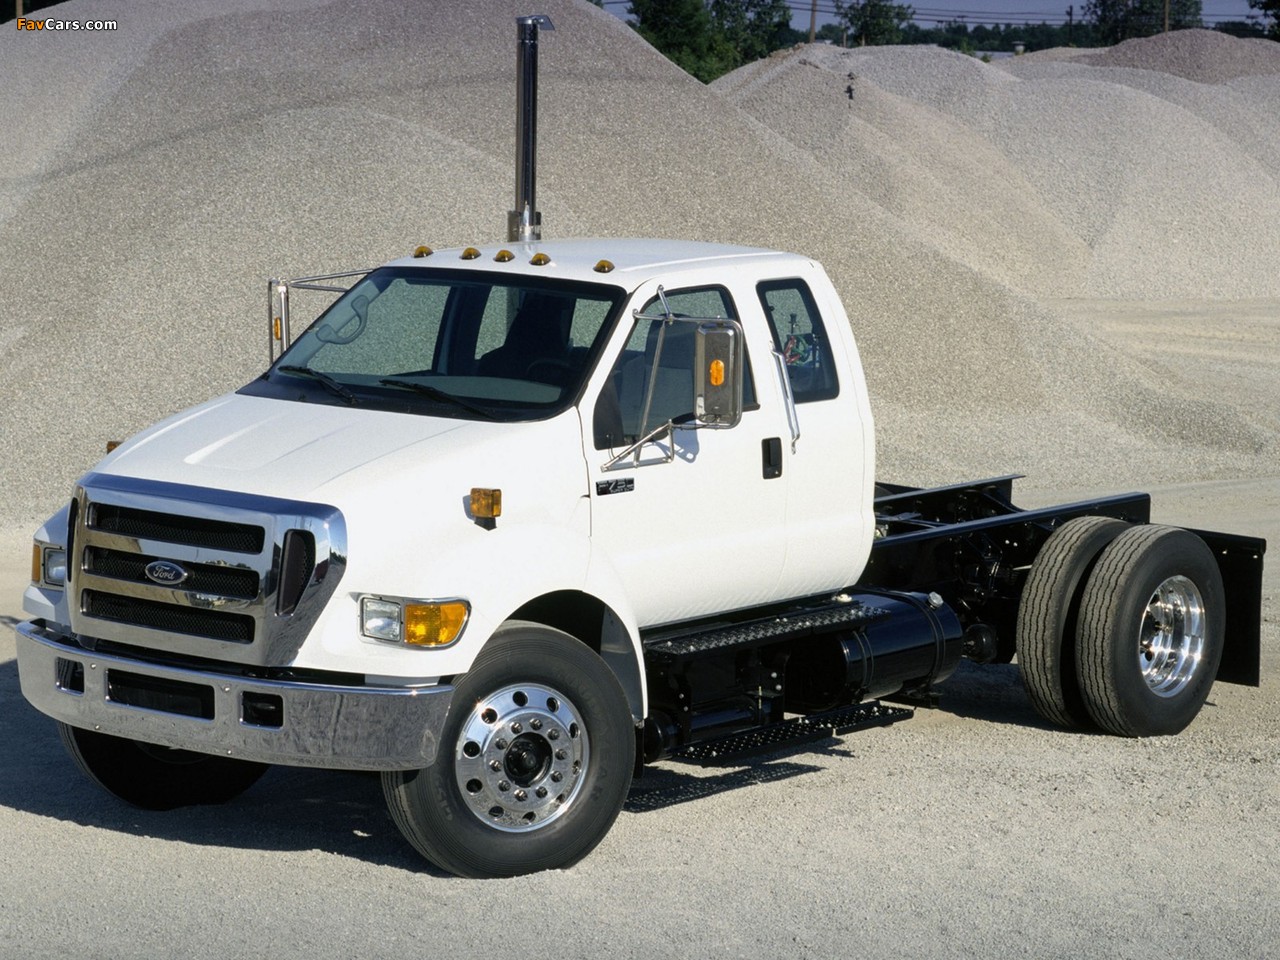 Ford F-750 Super Duty Extended Cab 2007 photos (1280 x 960)